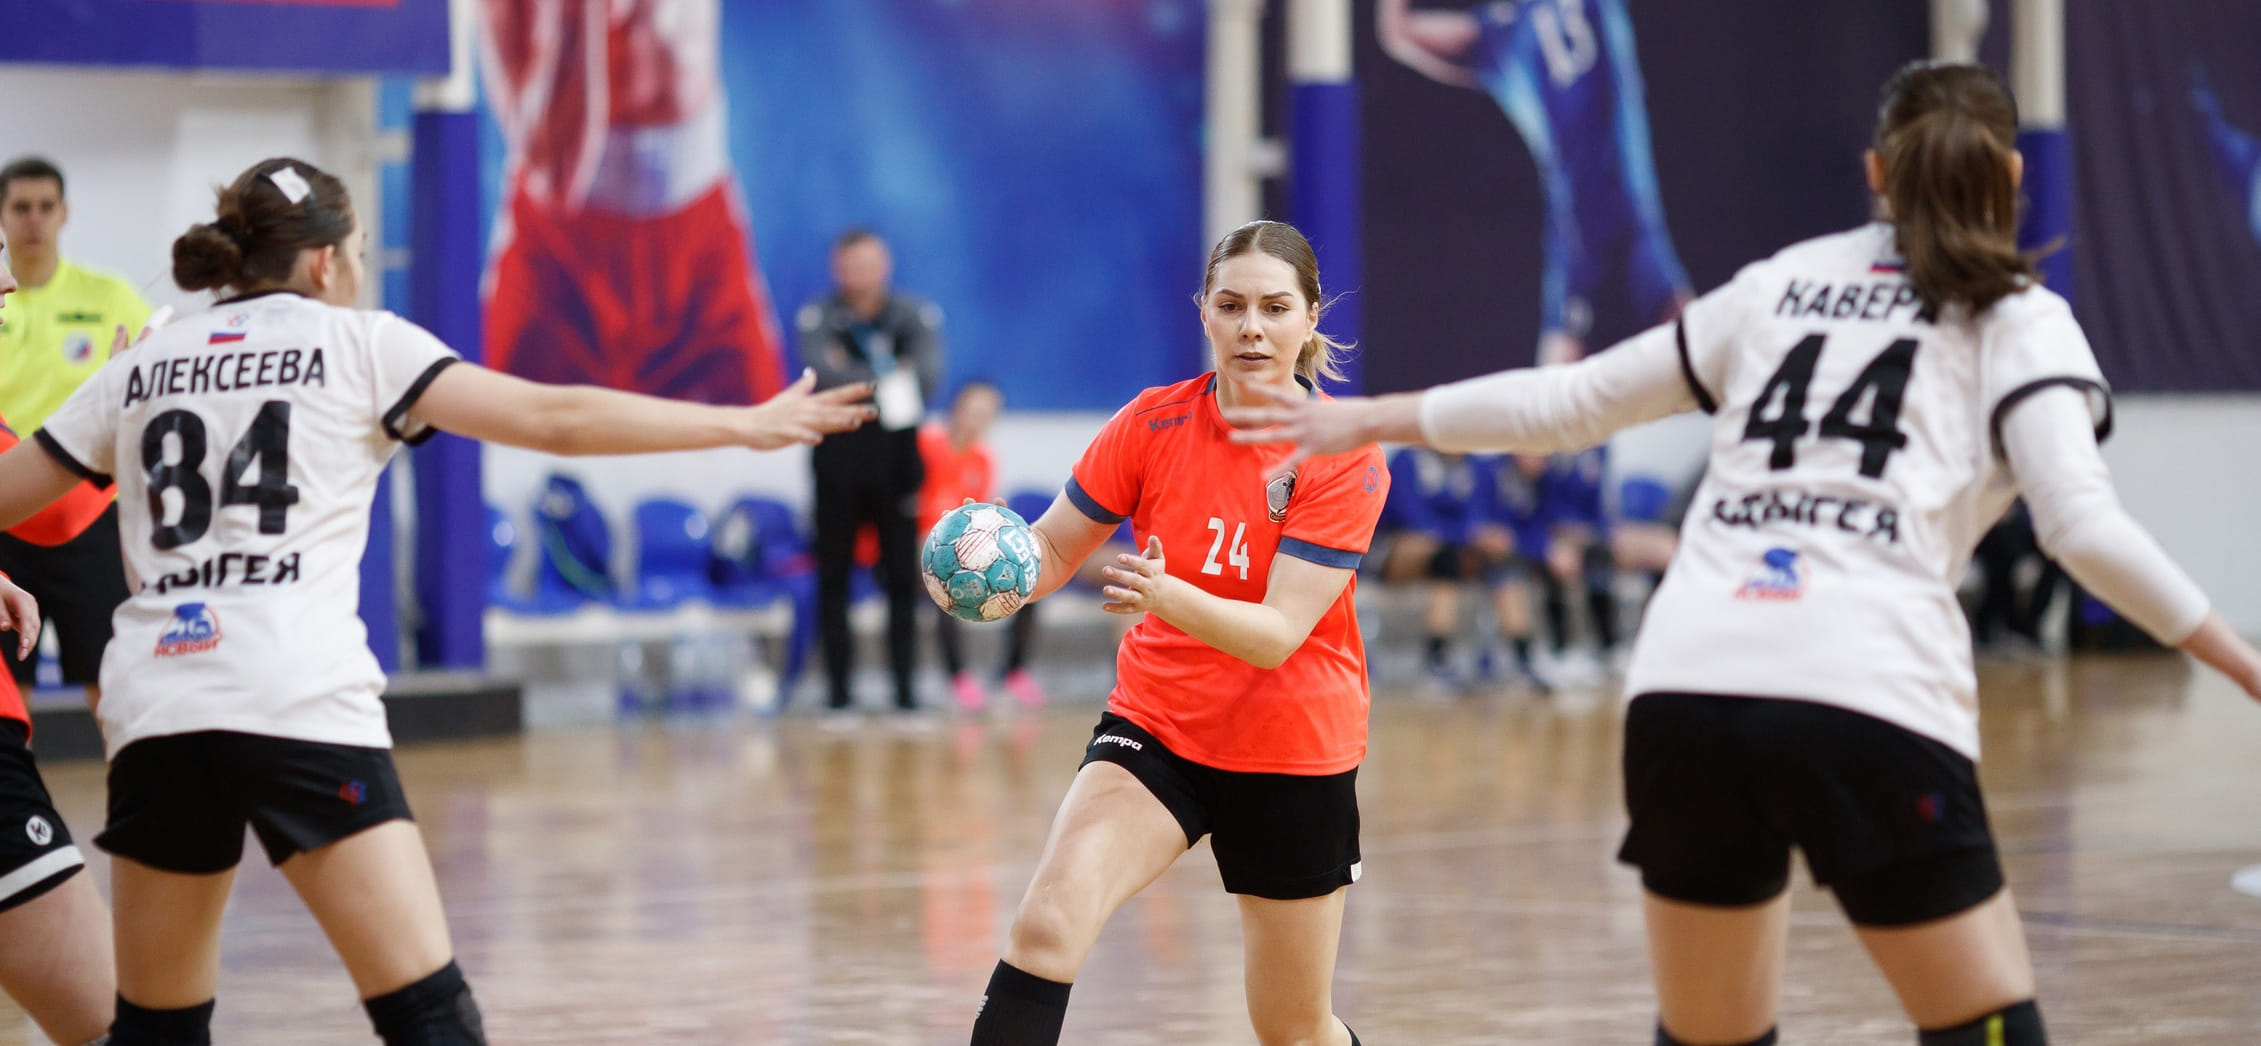 Olimpbet Super League. HC Stavropolye beat HC AGU-Adyif in a home match of the consolation tournament. It’s the third consecutive defeat for HC AGU-Adyif